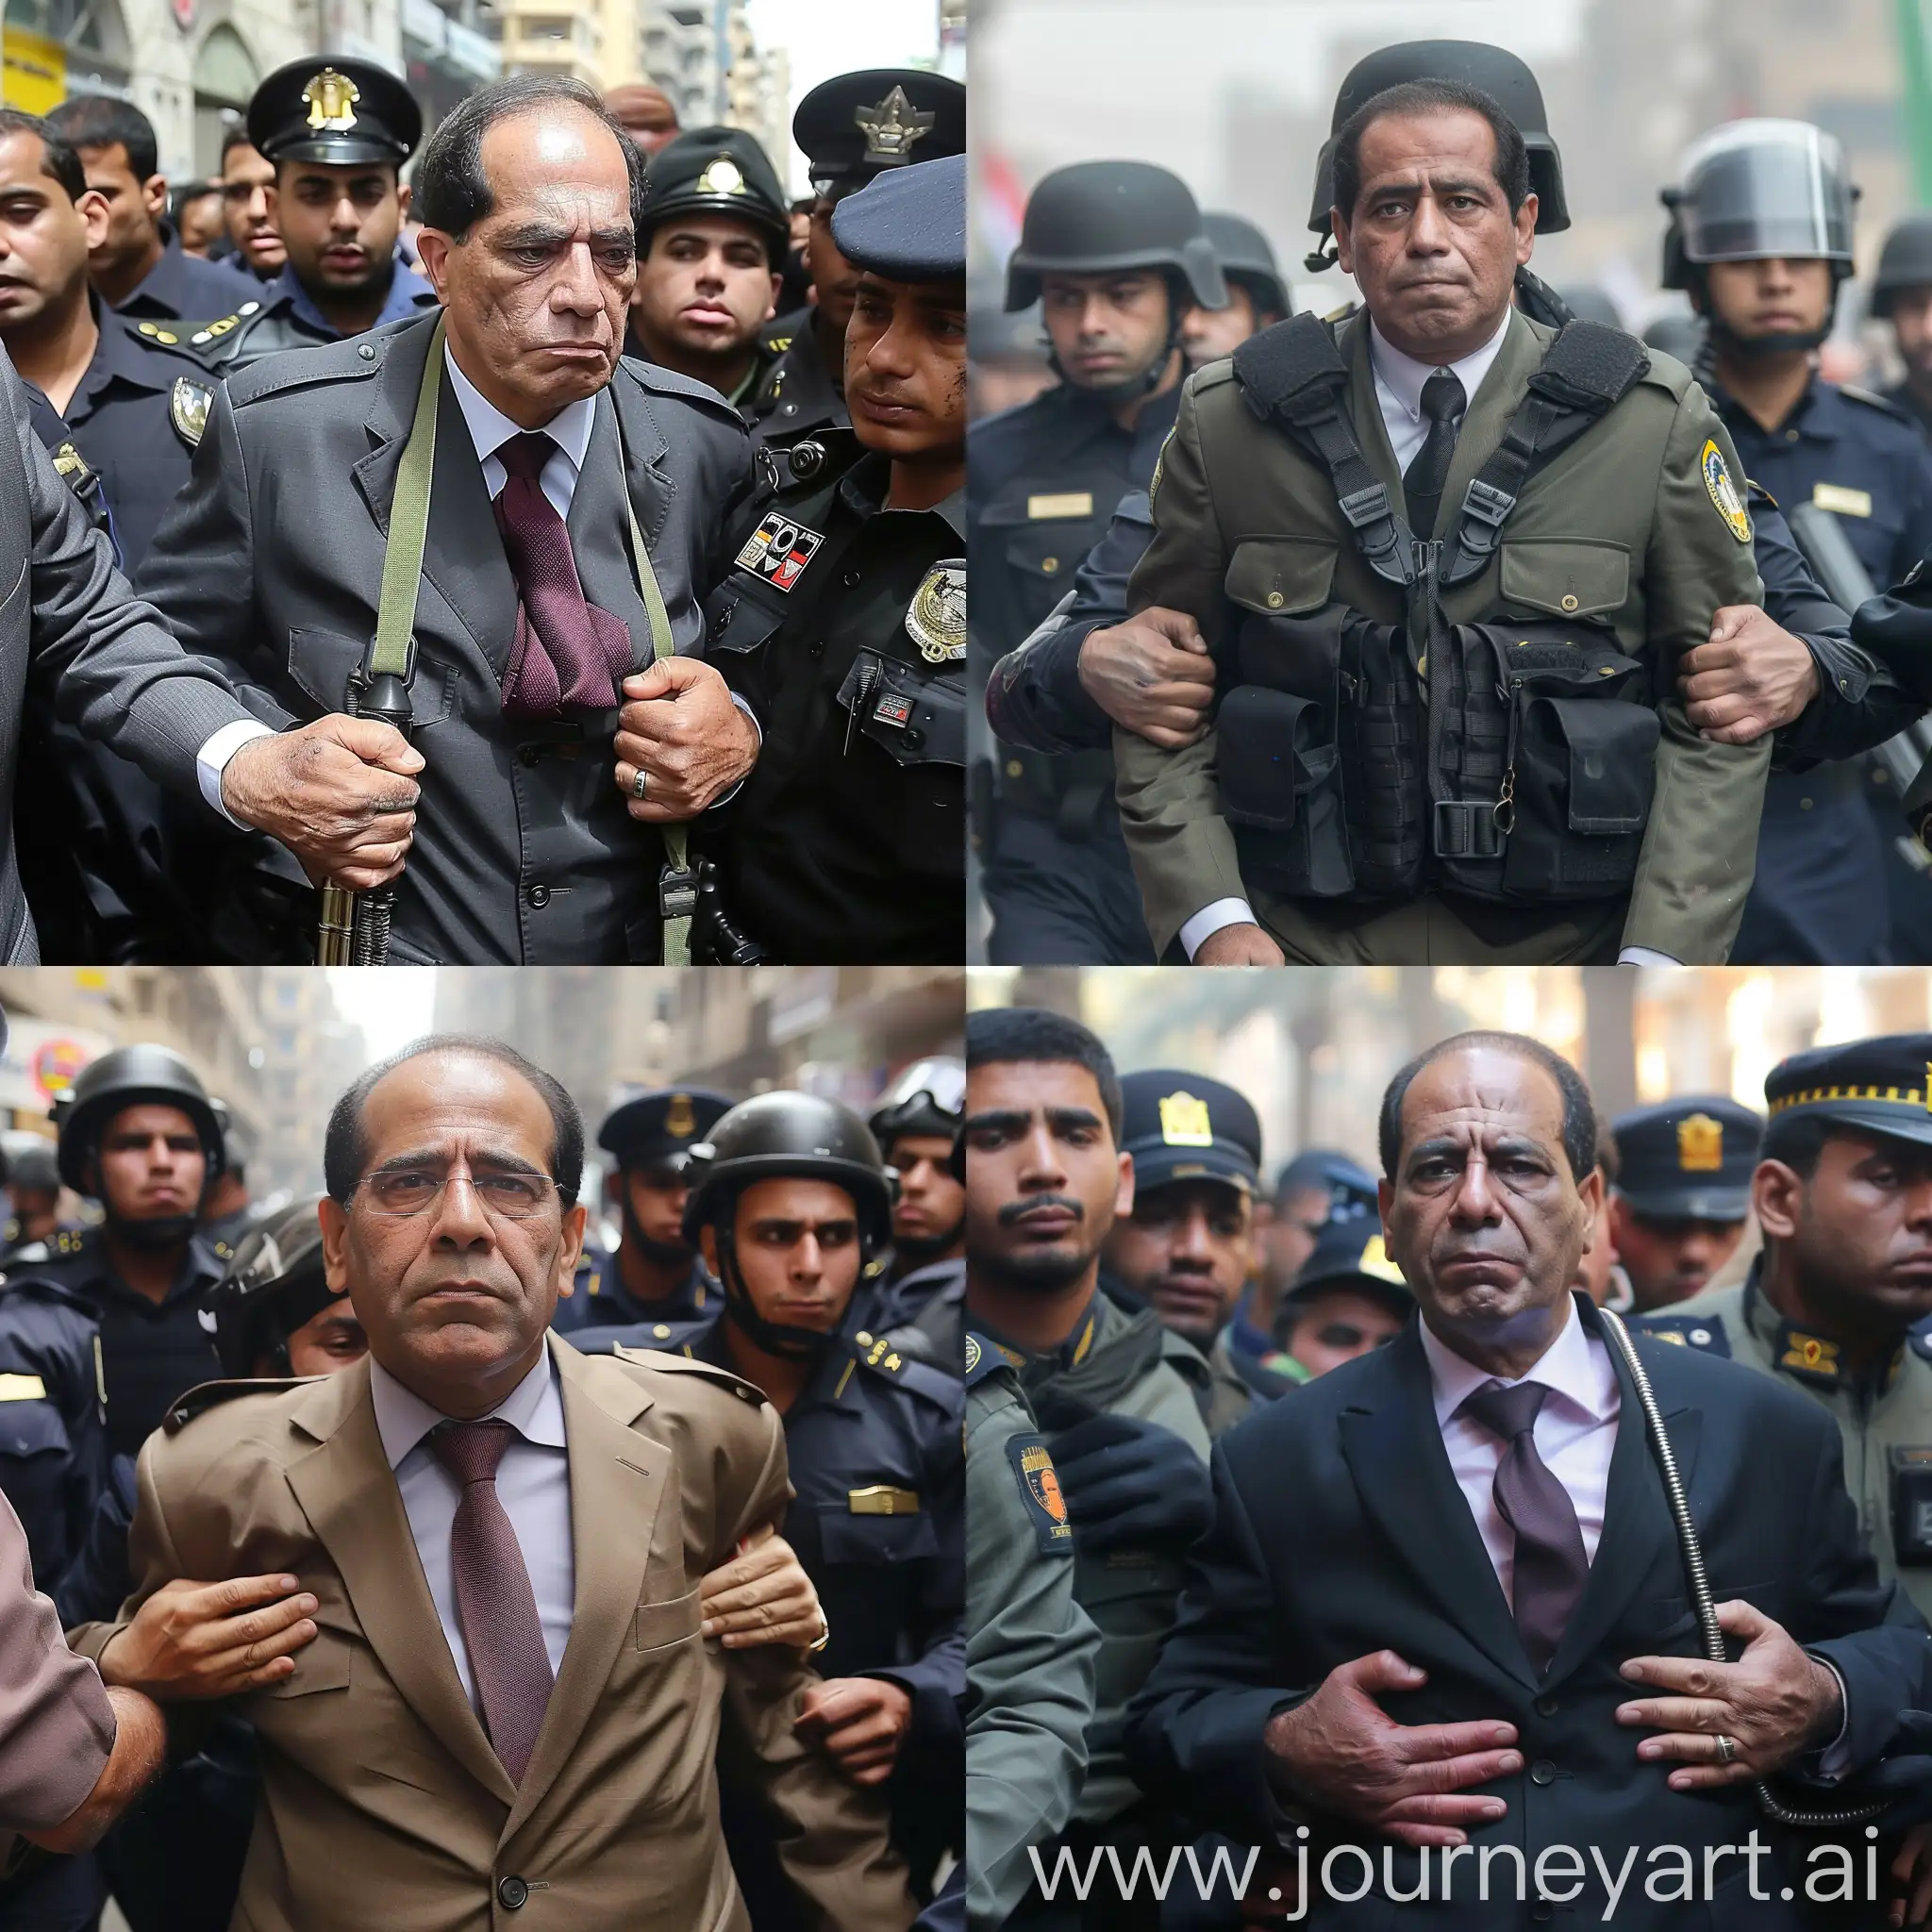 Abdel fattah el sisi getting arrested by Egyptian police